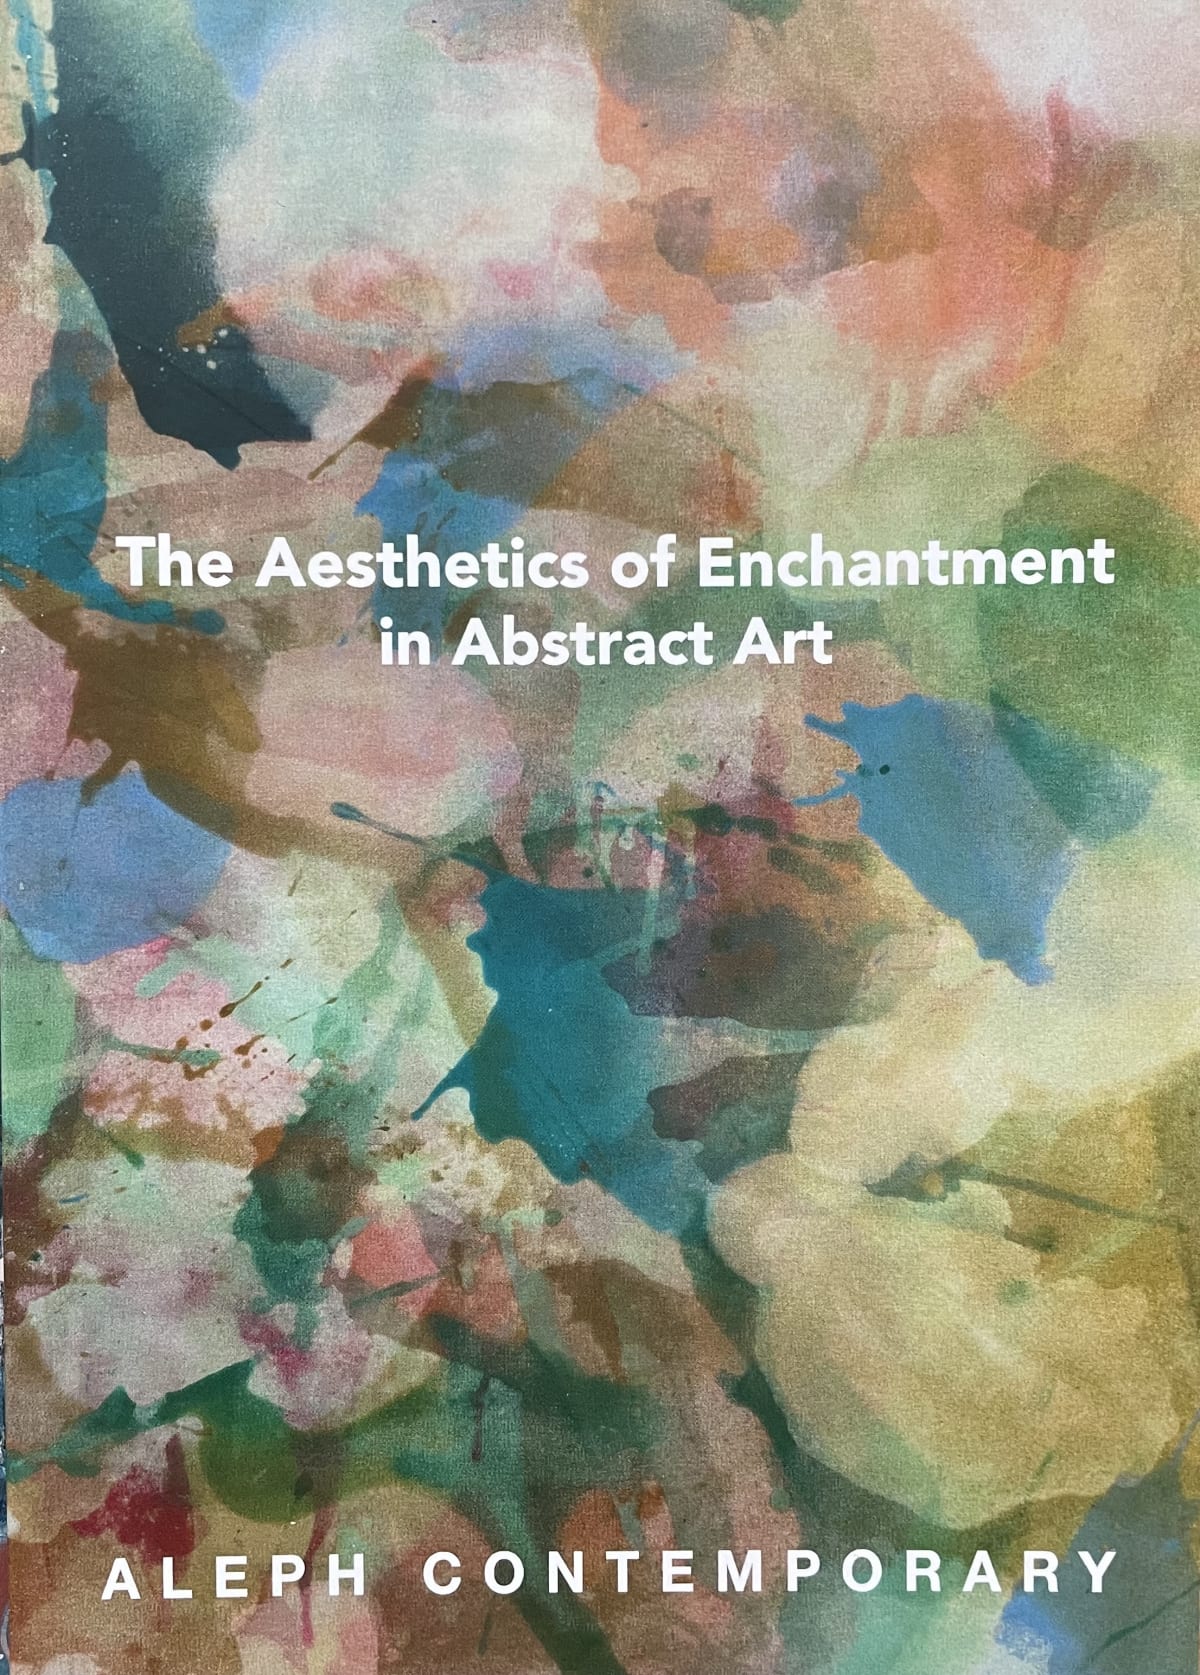 The Aesthetics of Enchantment in Abstract Art